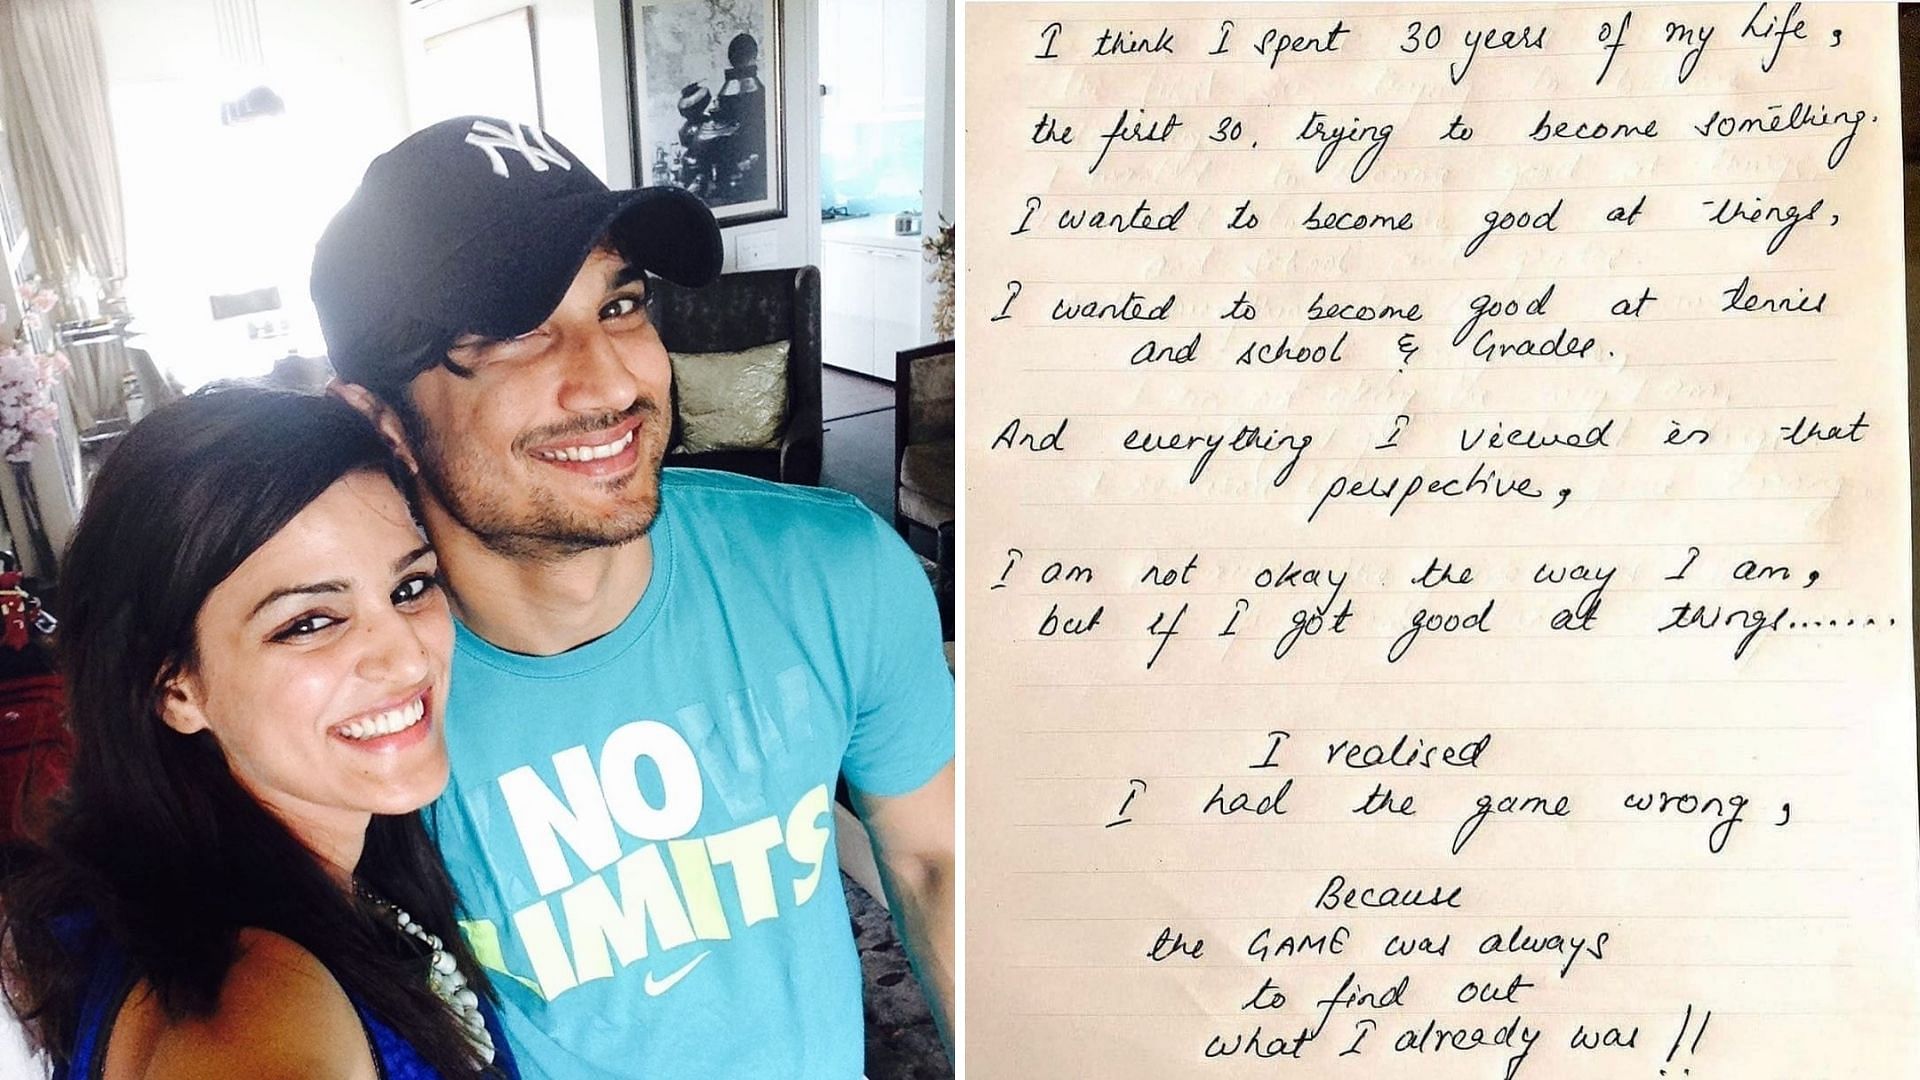 Sushant Singh Rajput's sister Shweta Singh Kirti shares a note penned by him.